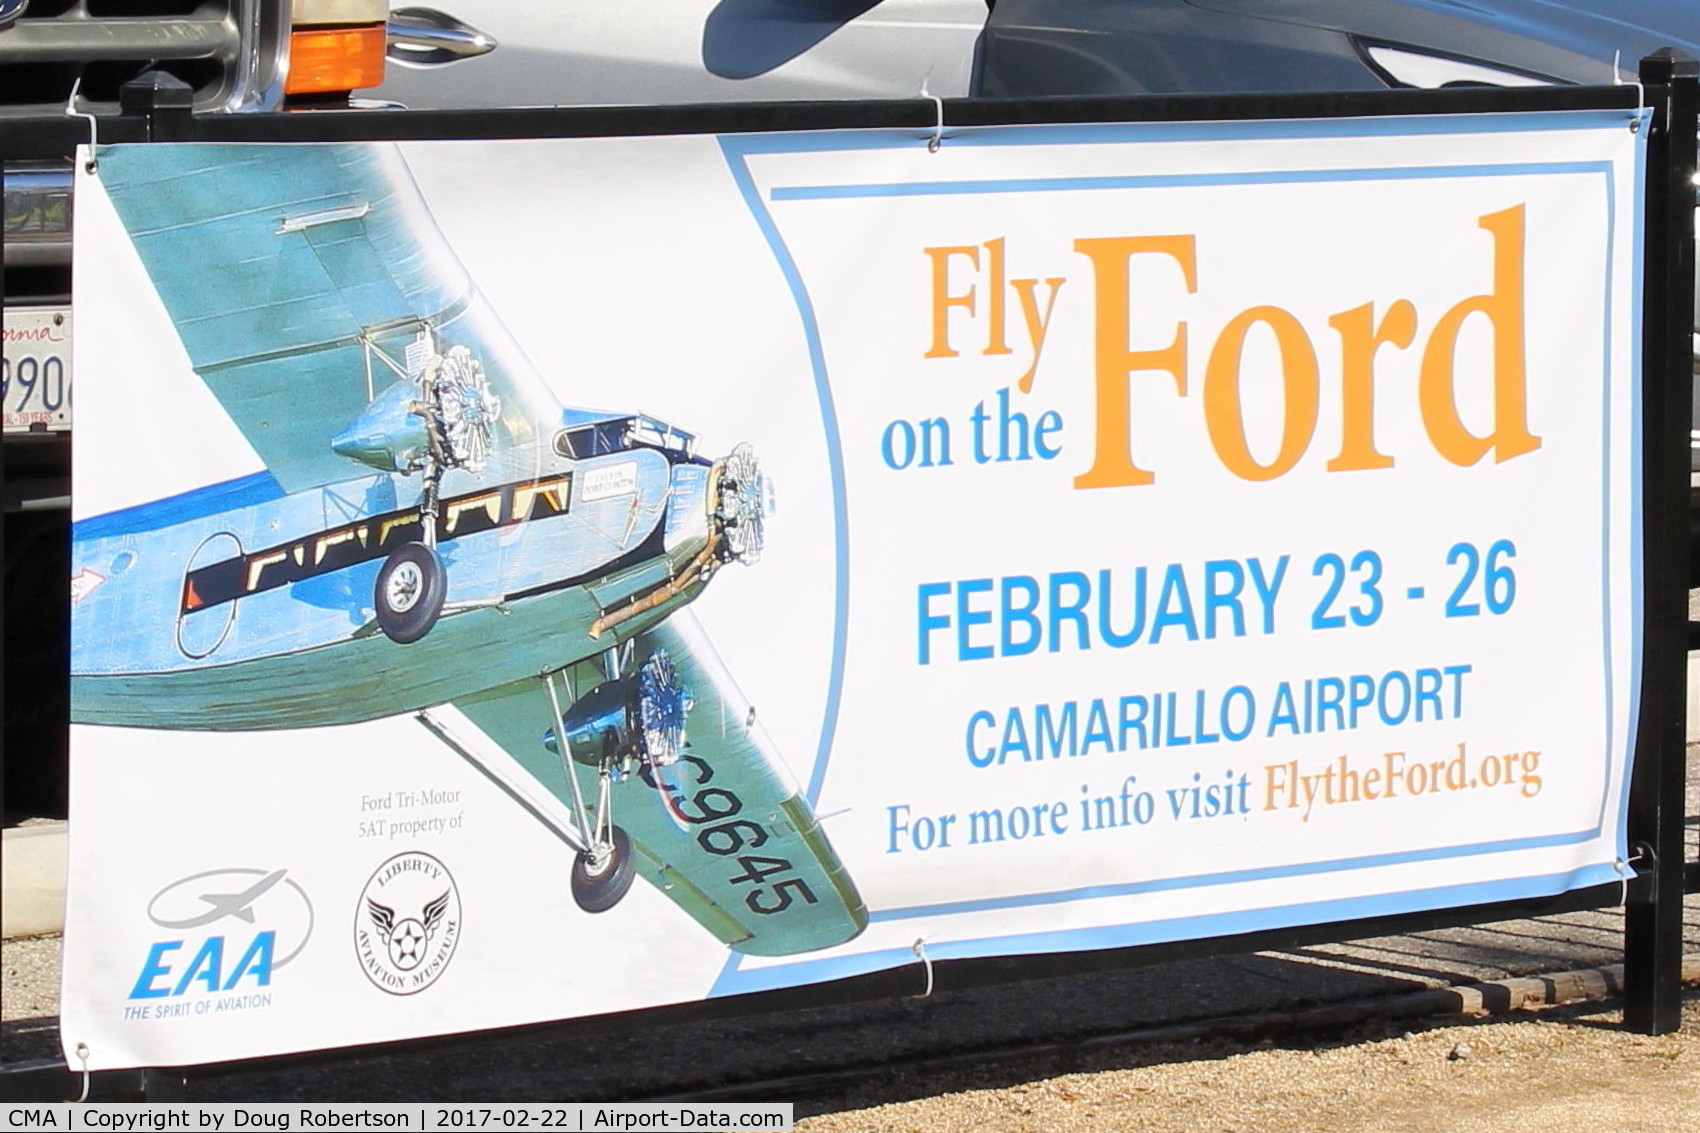 Camarillo Airport (CMA) - Advertisement for the EAA Ford TRI-Motor visit to CMA giving fee-based aircraft rides on dates shown in its Western Tour.